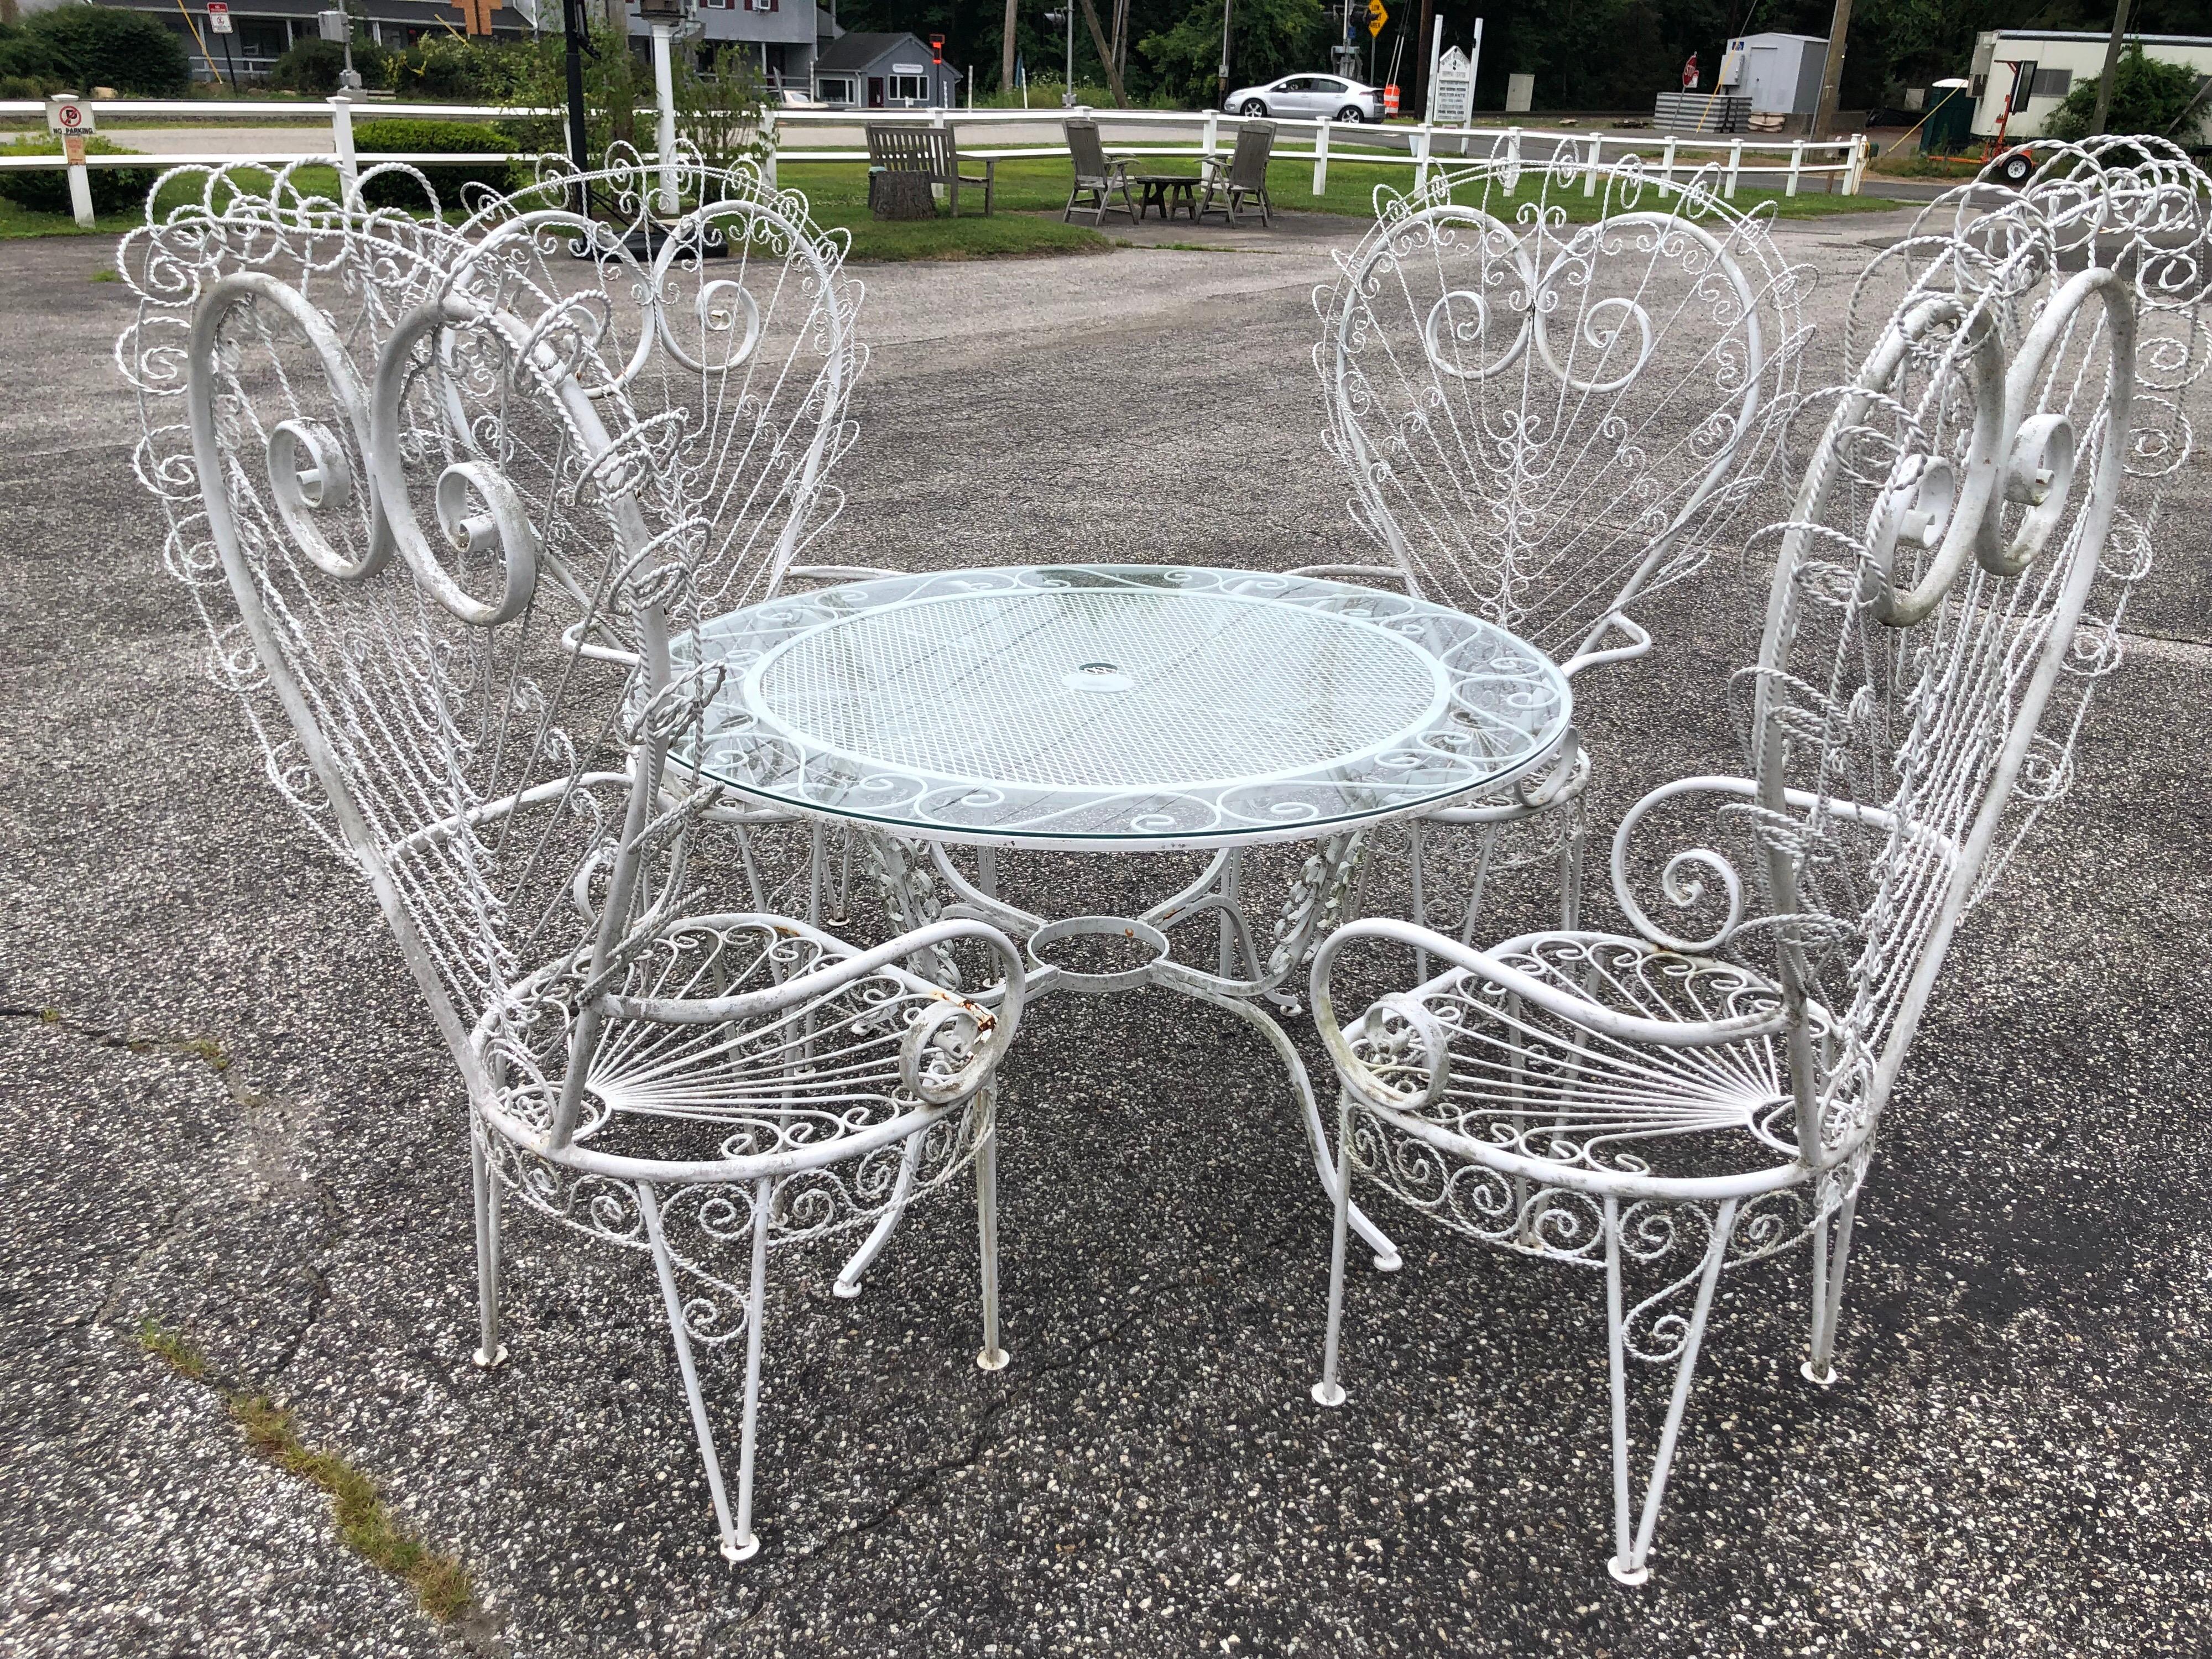 Salterini style white iron peacock Patio set. Fabulous Hollywood Regency style Patio set. Over the top glam or boho chic! Recently resprayed in white. Includes four chairs and table with custom cut glass with umbrella cutout. Table diameter is 48